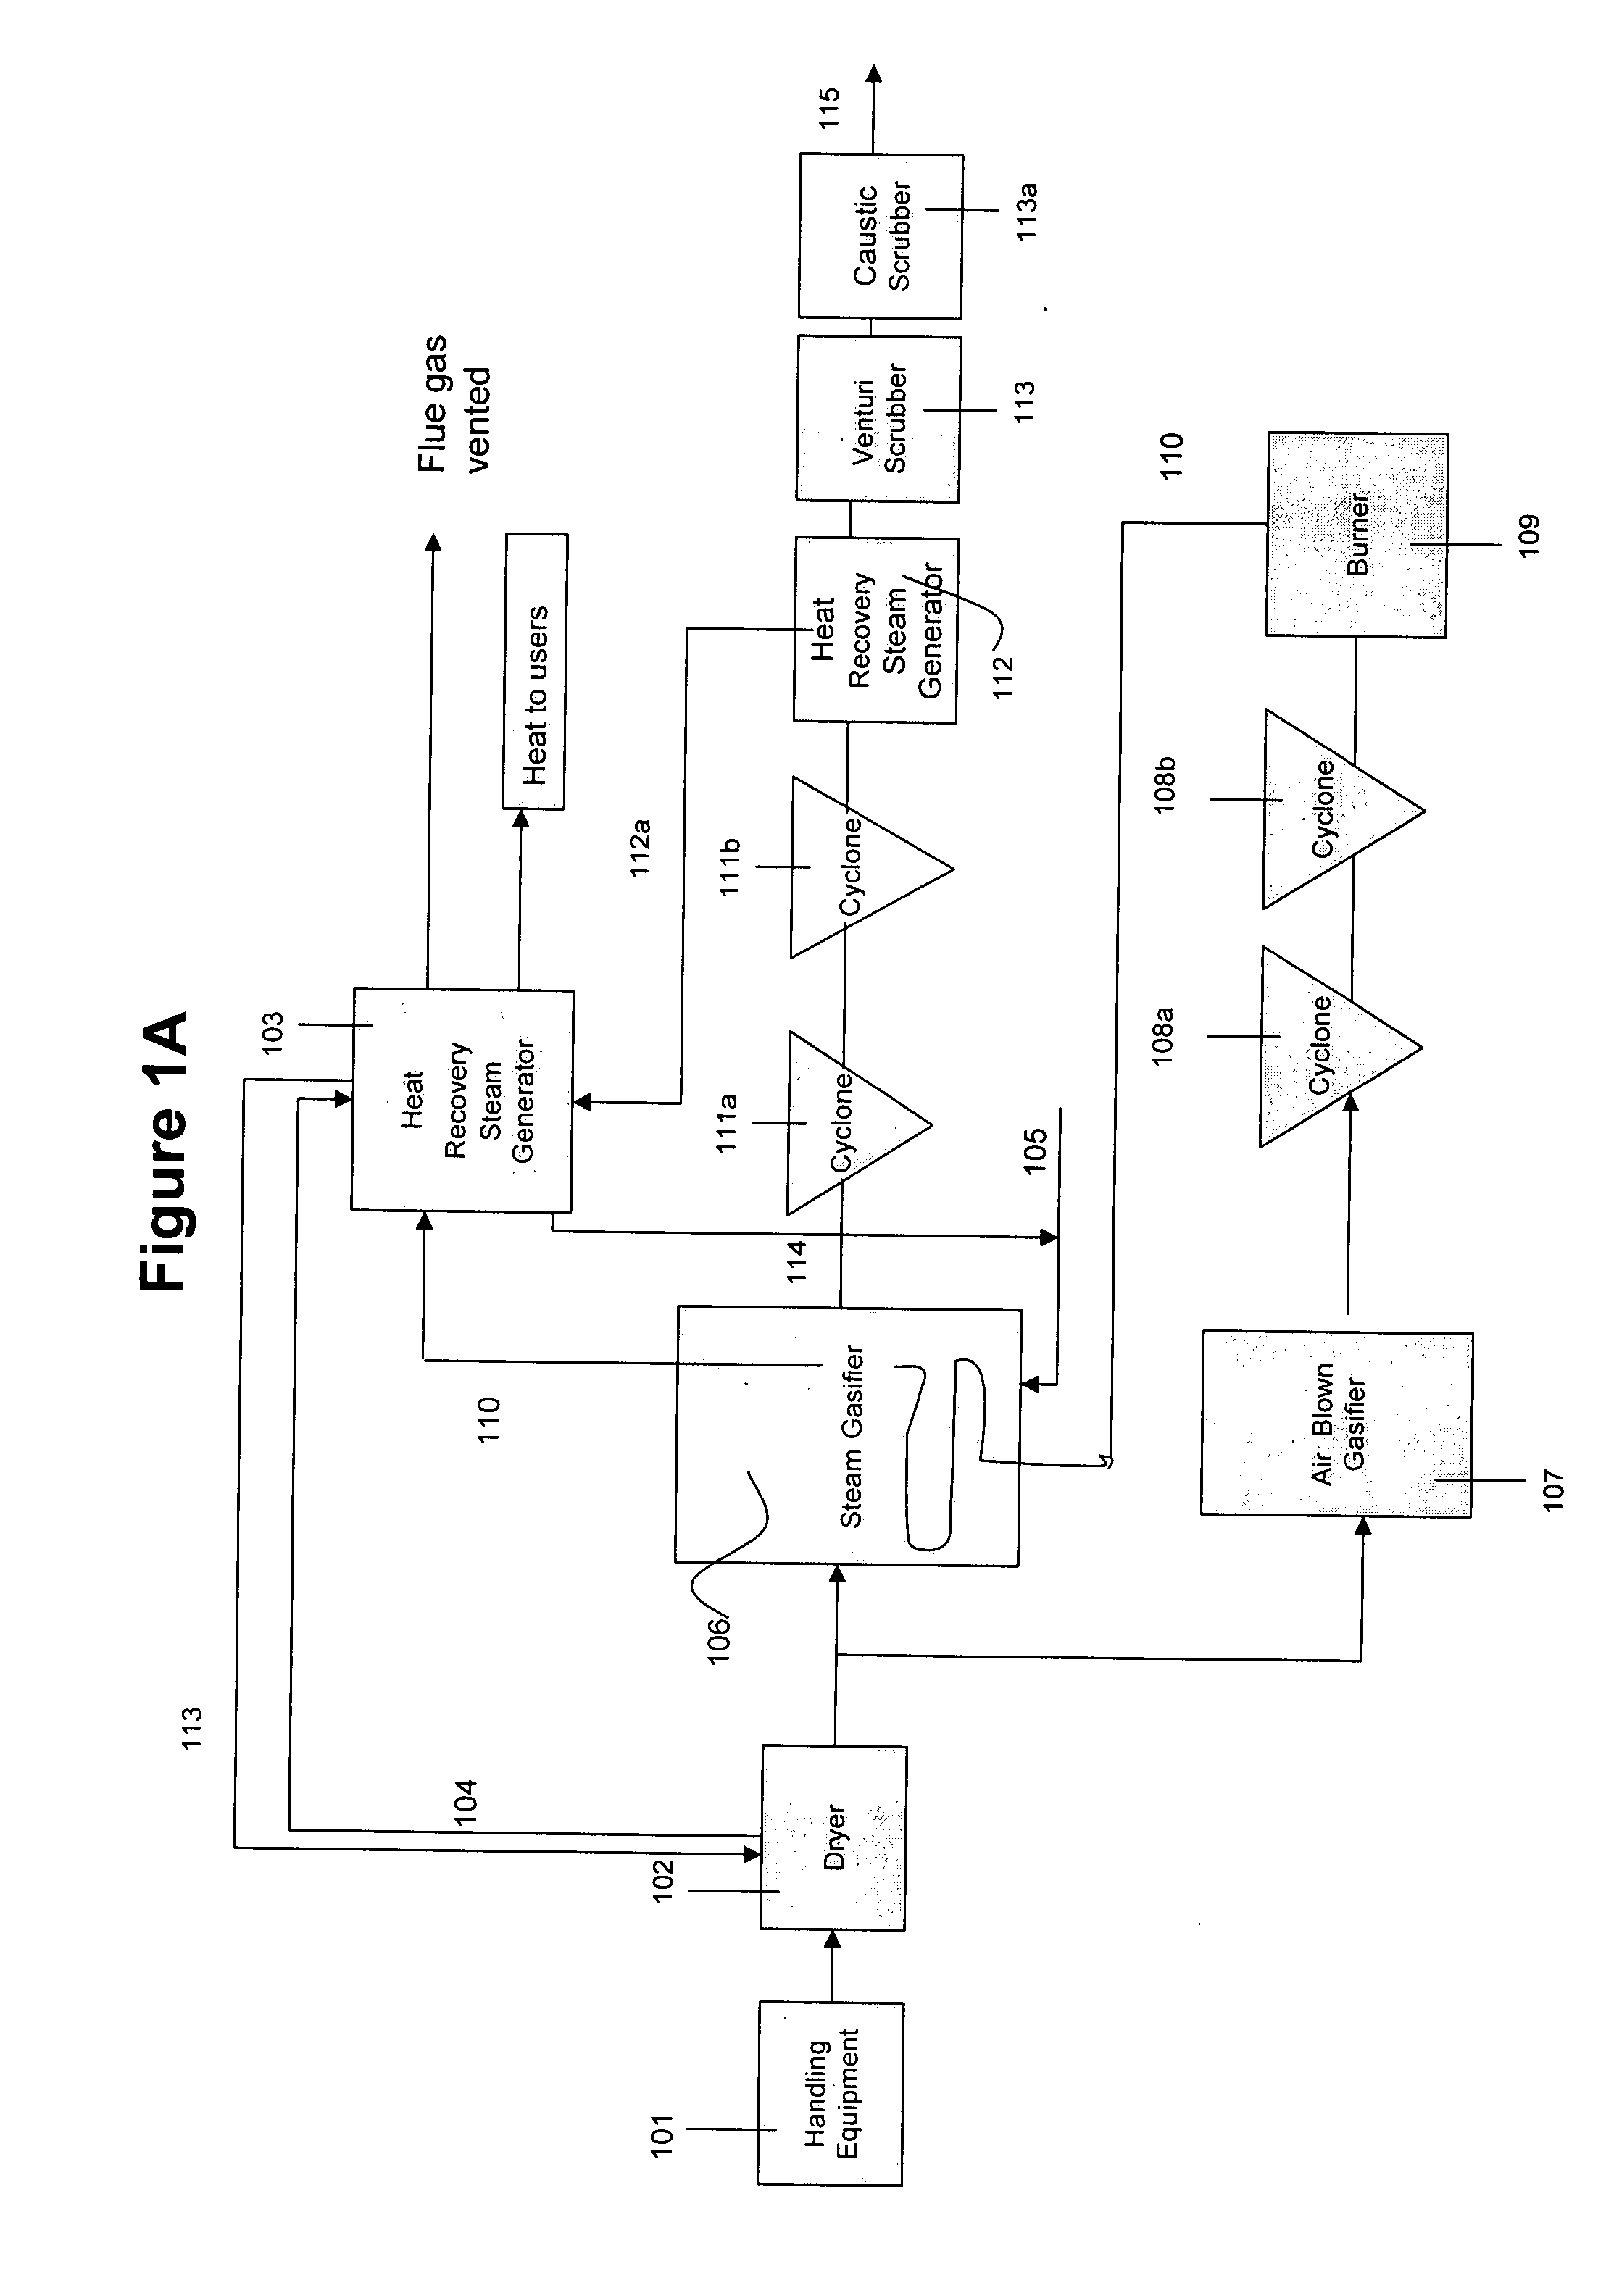 System and method for converting biomass to ethanol via syngas